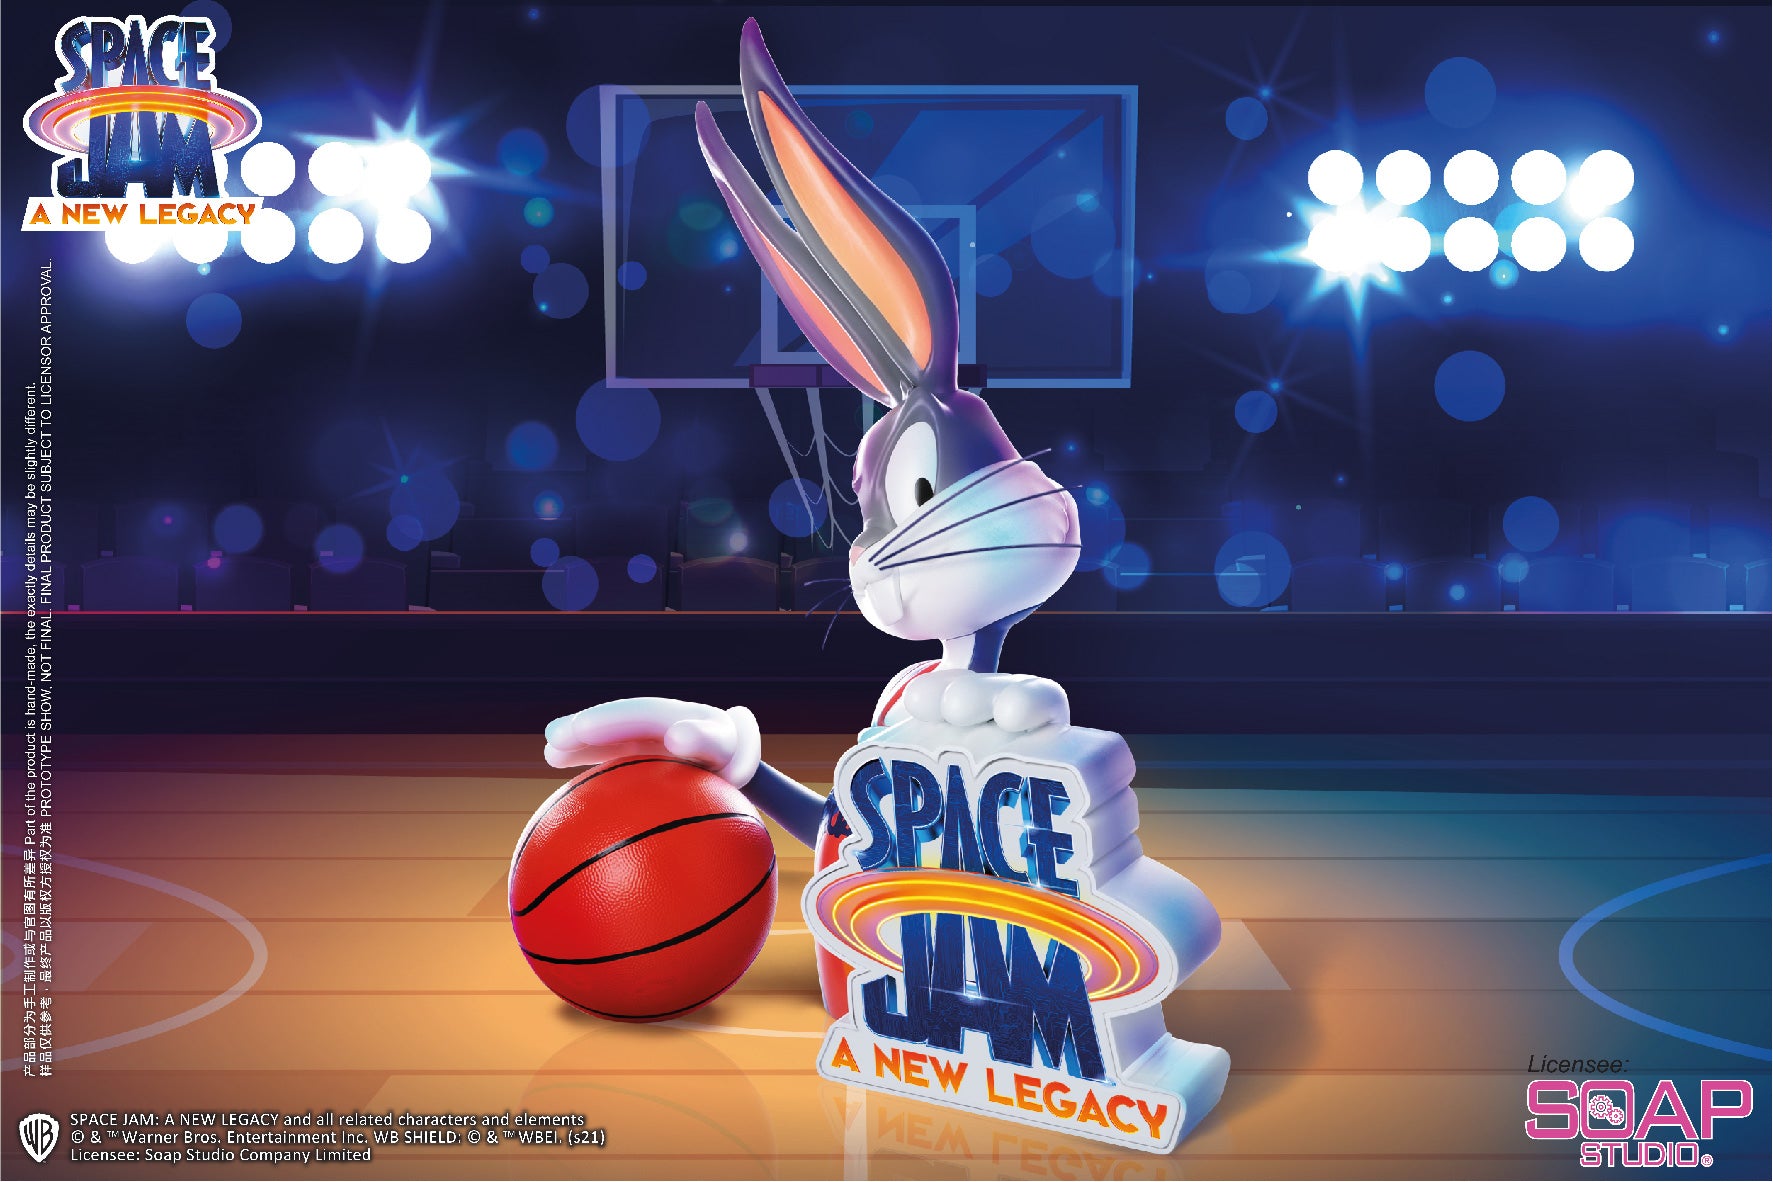 Soap Studio CA182 Space Jam 2 A New Legacy: Bugs Bunny Bust Figure Statue